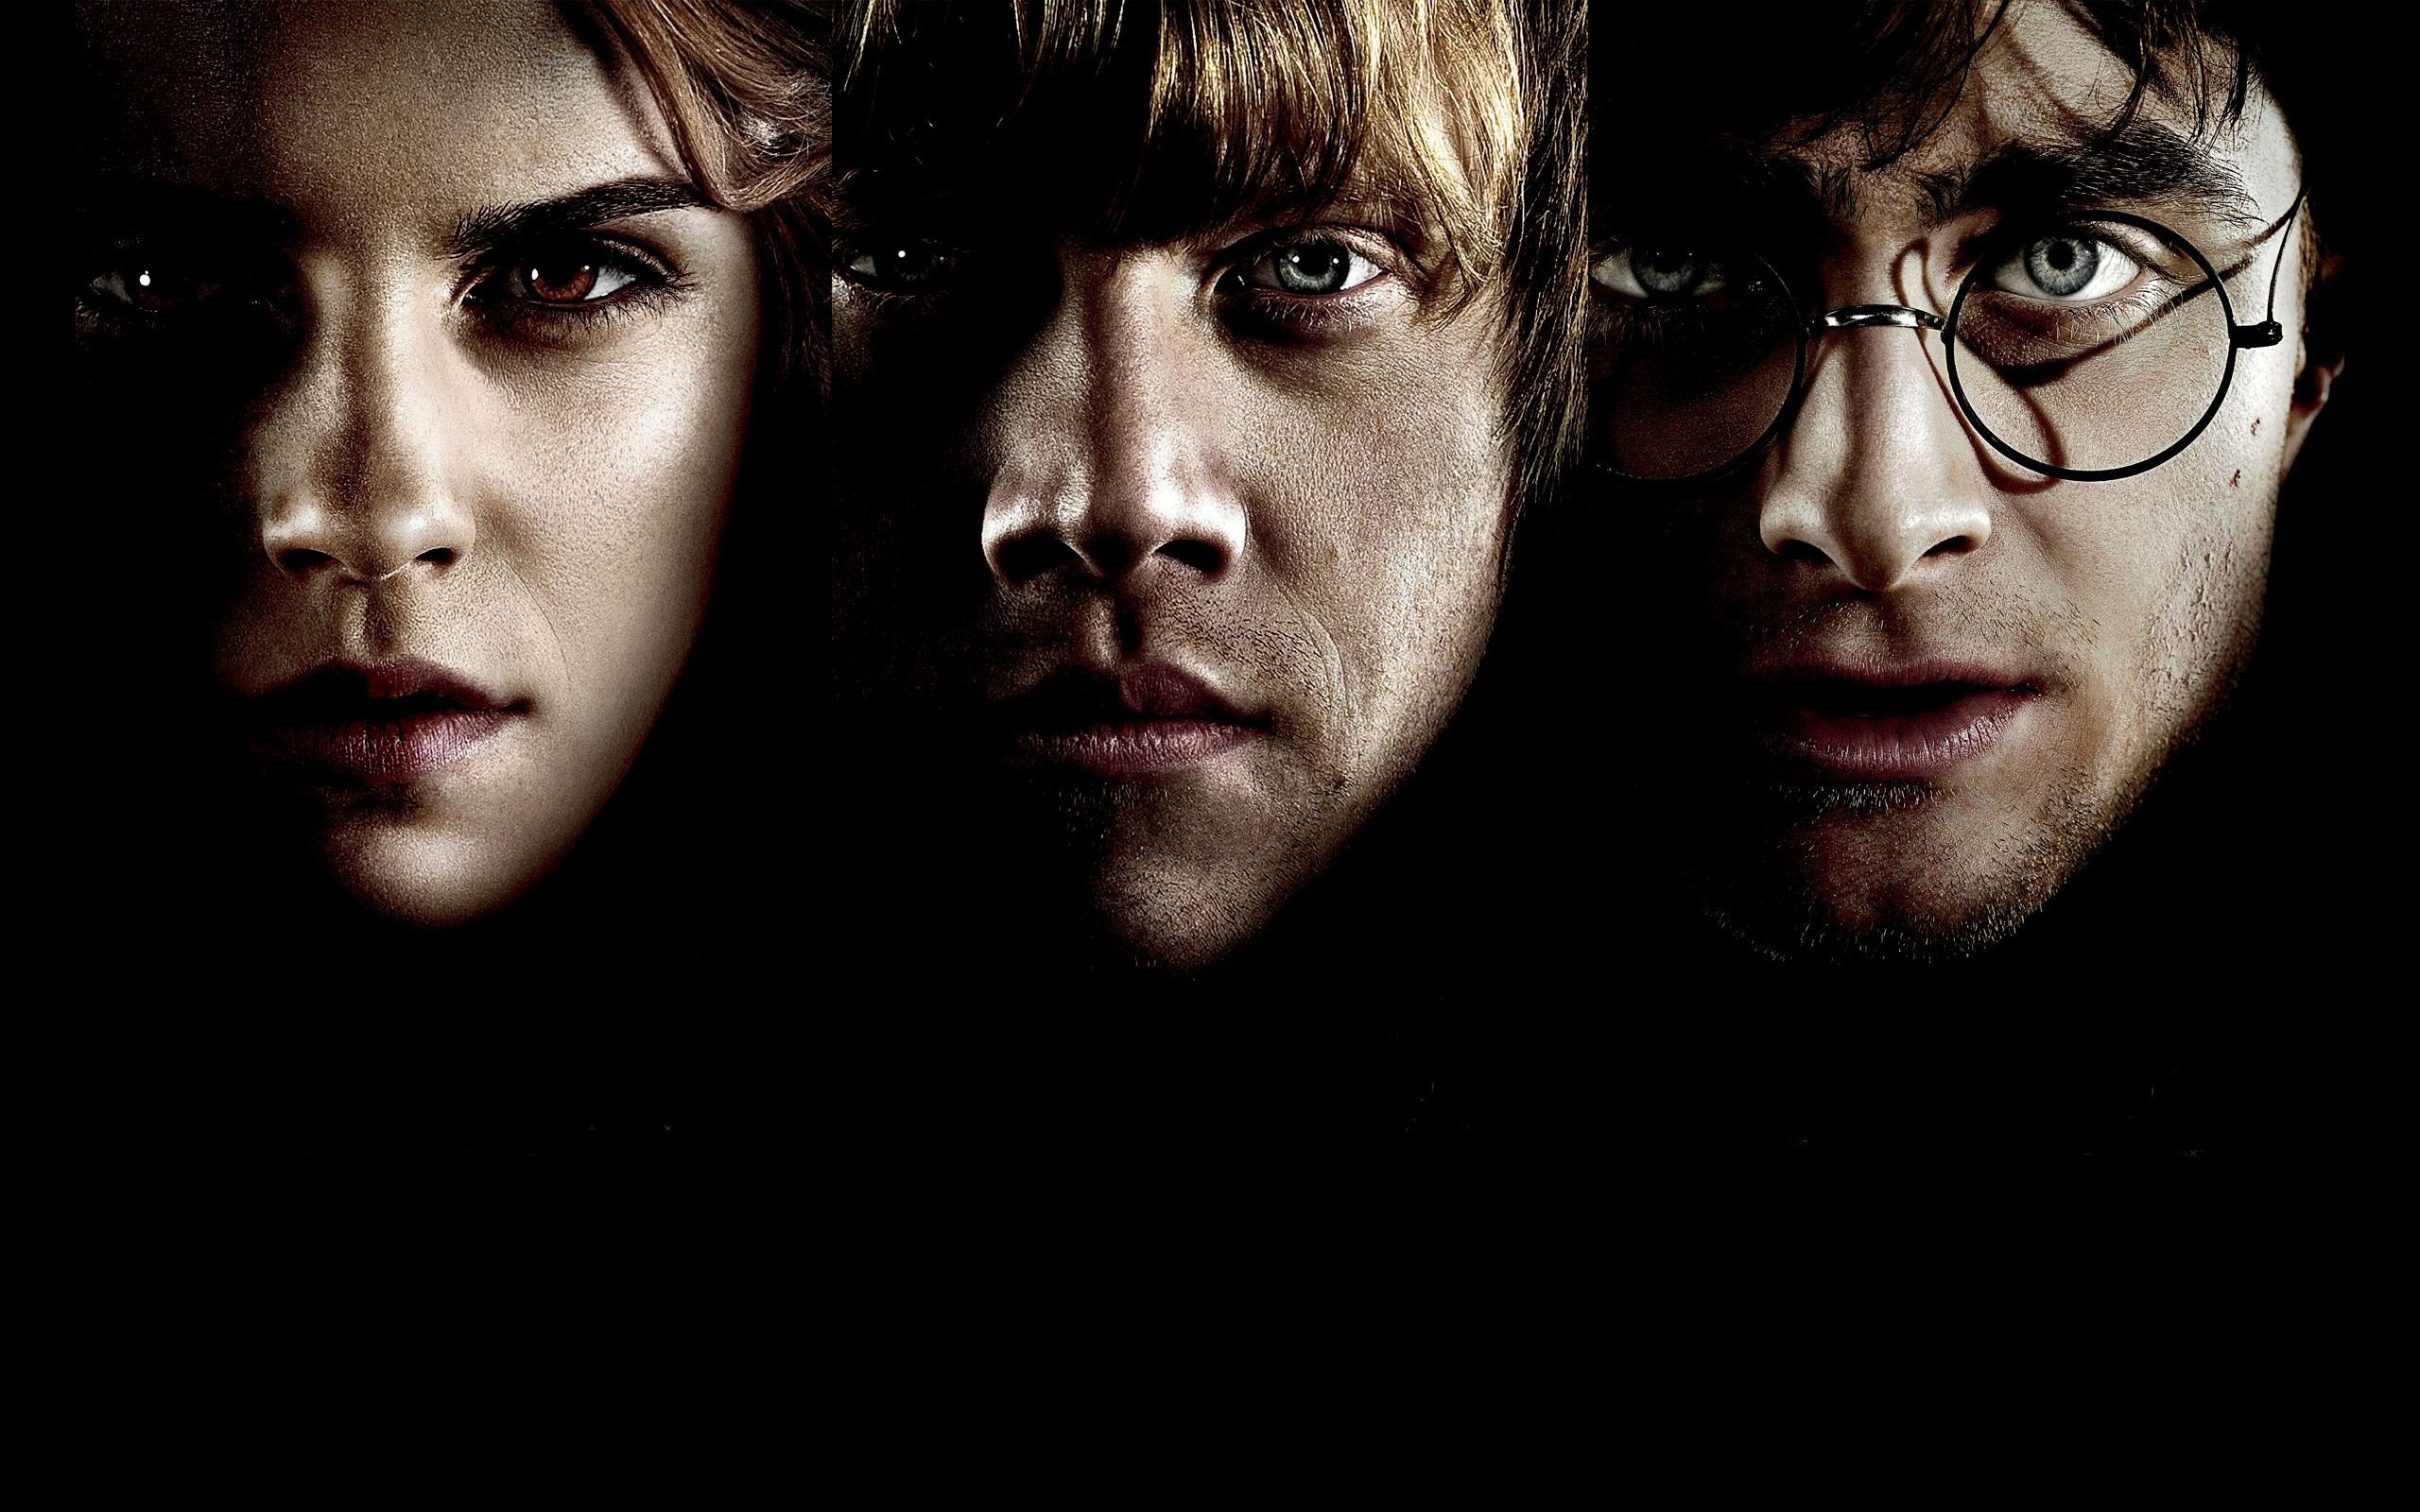 emma, Watson, Harry, Potter, Harry, Potter, And, The, Deathly, Hallows, Daniel, Radcliffe, Rupert, Grint, Hermione, Granger, Ron, Weasley, Men, With, Glasses, Portraits Wallpaper